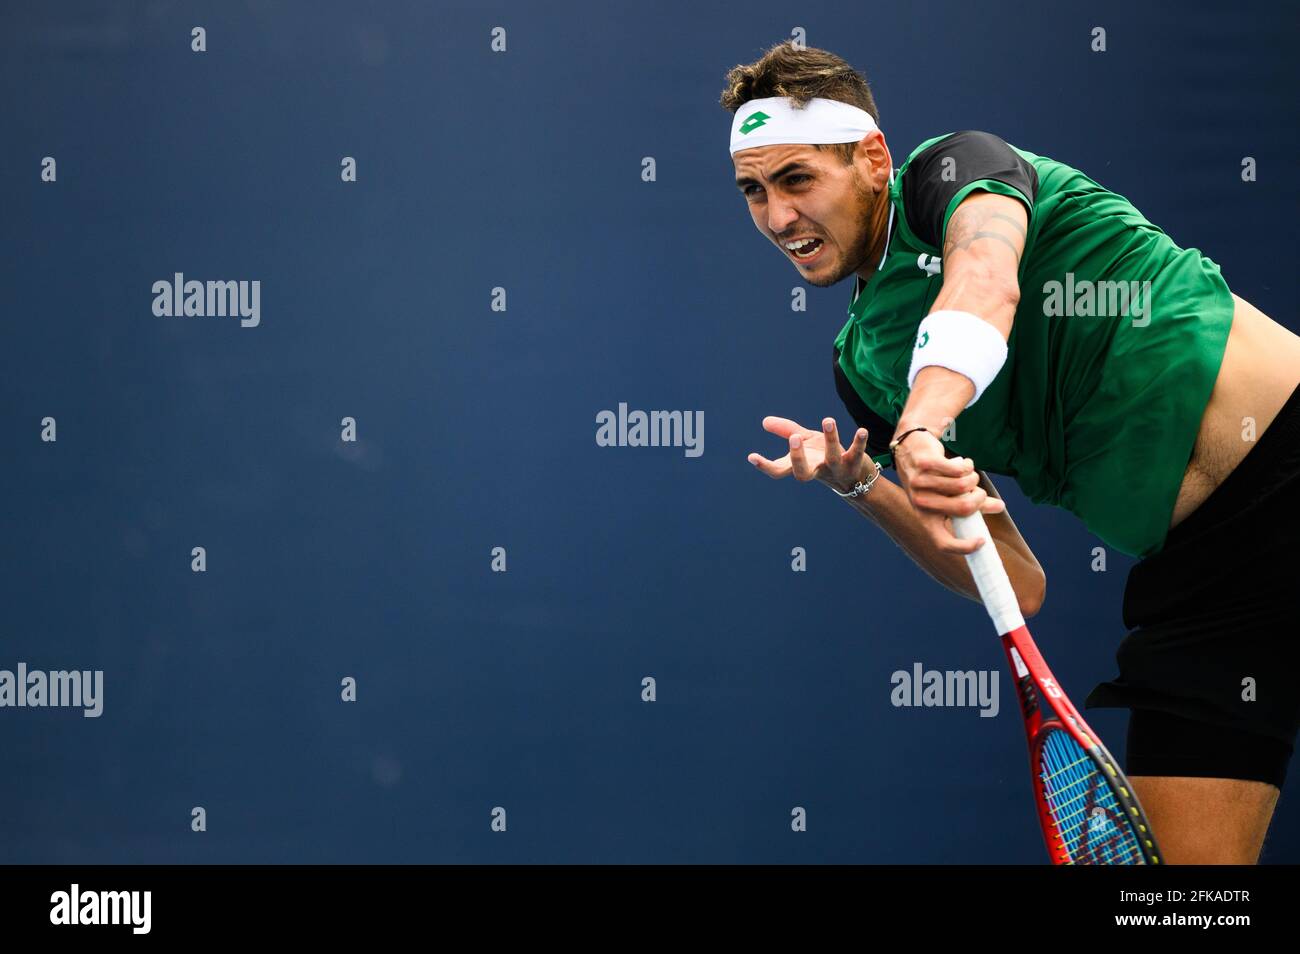 March 24, 2021 Alejandro Tabilo of Chile serves the ball during his loss to Mikael Ymer of Sweden in the first round of the Miami Open on March 24, 2021 on the